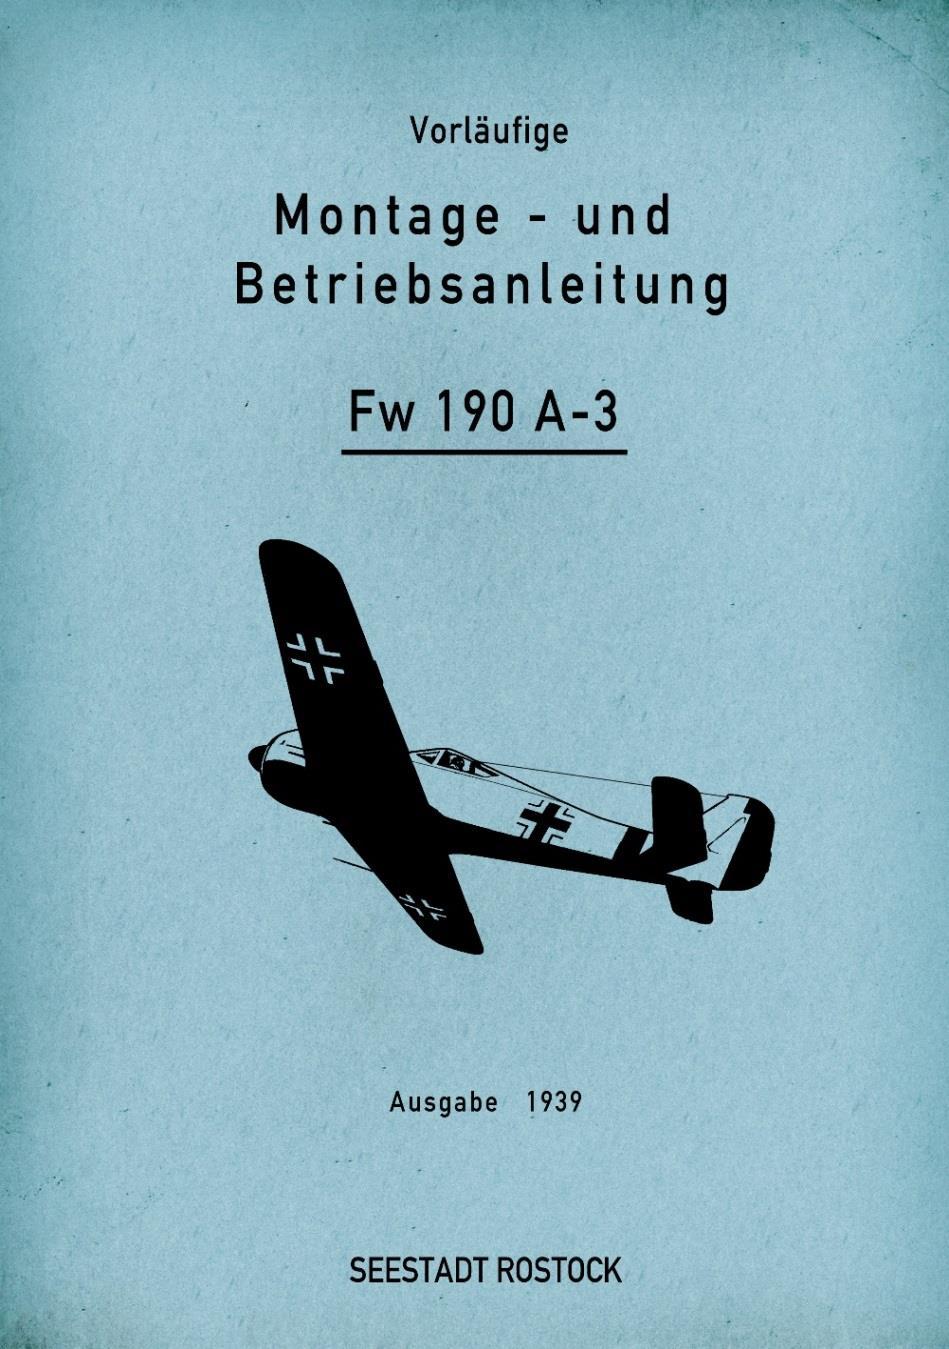 A.4 GERMAN FIGHTERS Focke-Wulfe Fw-190 A-3 The development of the Fw-190 had its origins in a request issued by the German Air Ministry (RLM) in the fall of 1937 for a second fighter design to